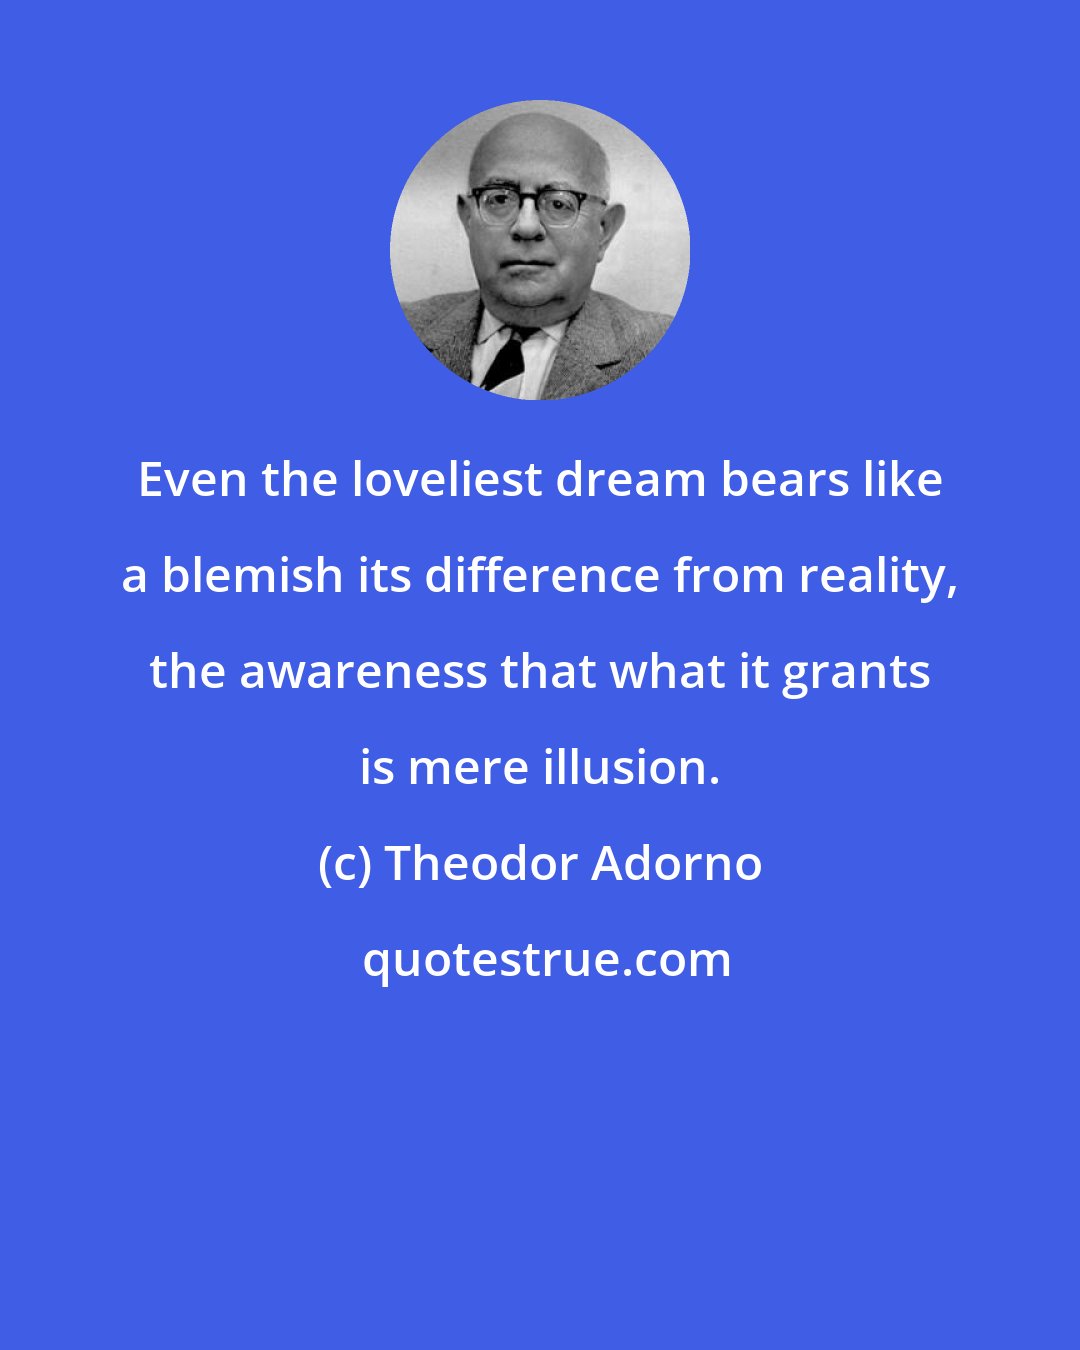 Theodor Adorno: Even the loveliest dream bears like a blemish its difference from reality, the awareness that what it grants is mere illusion.